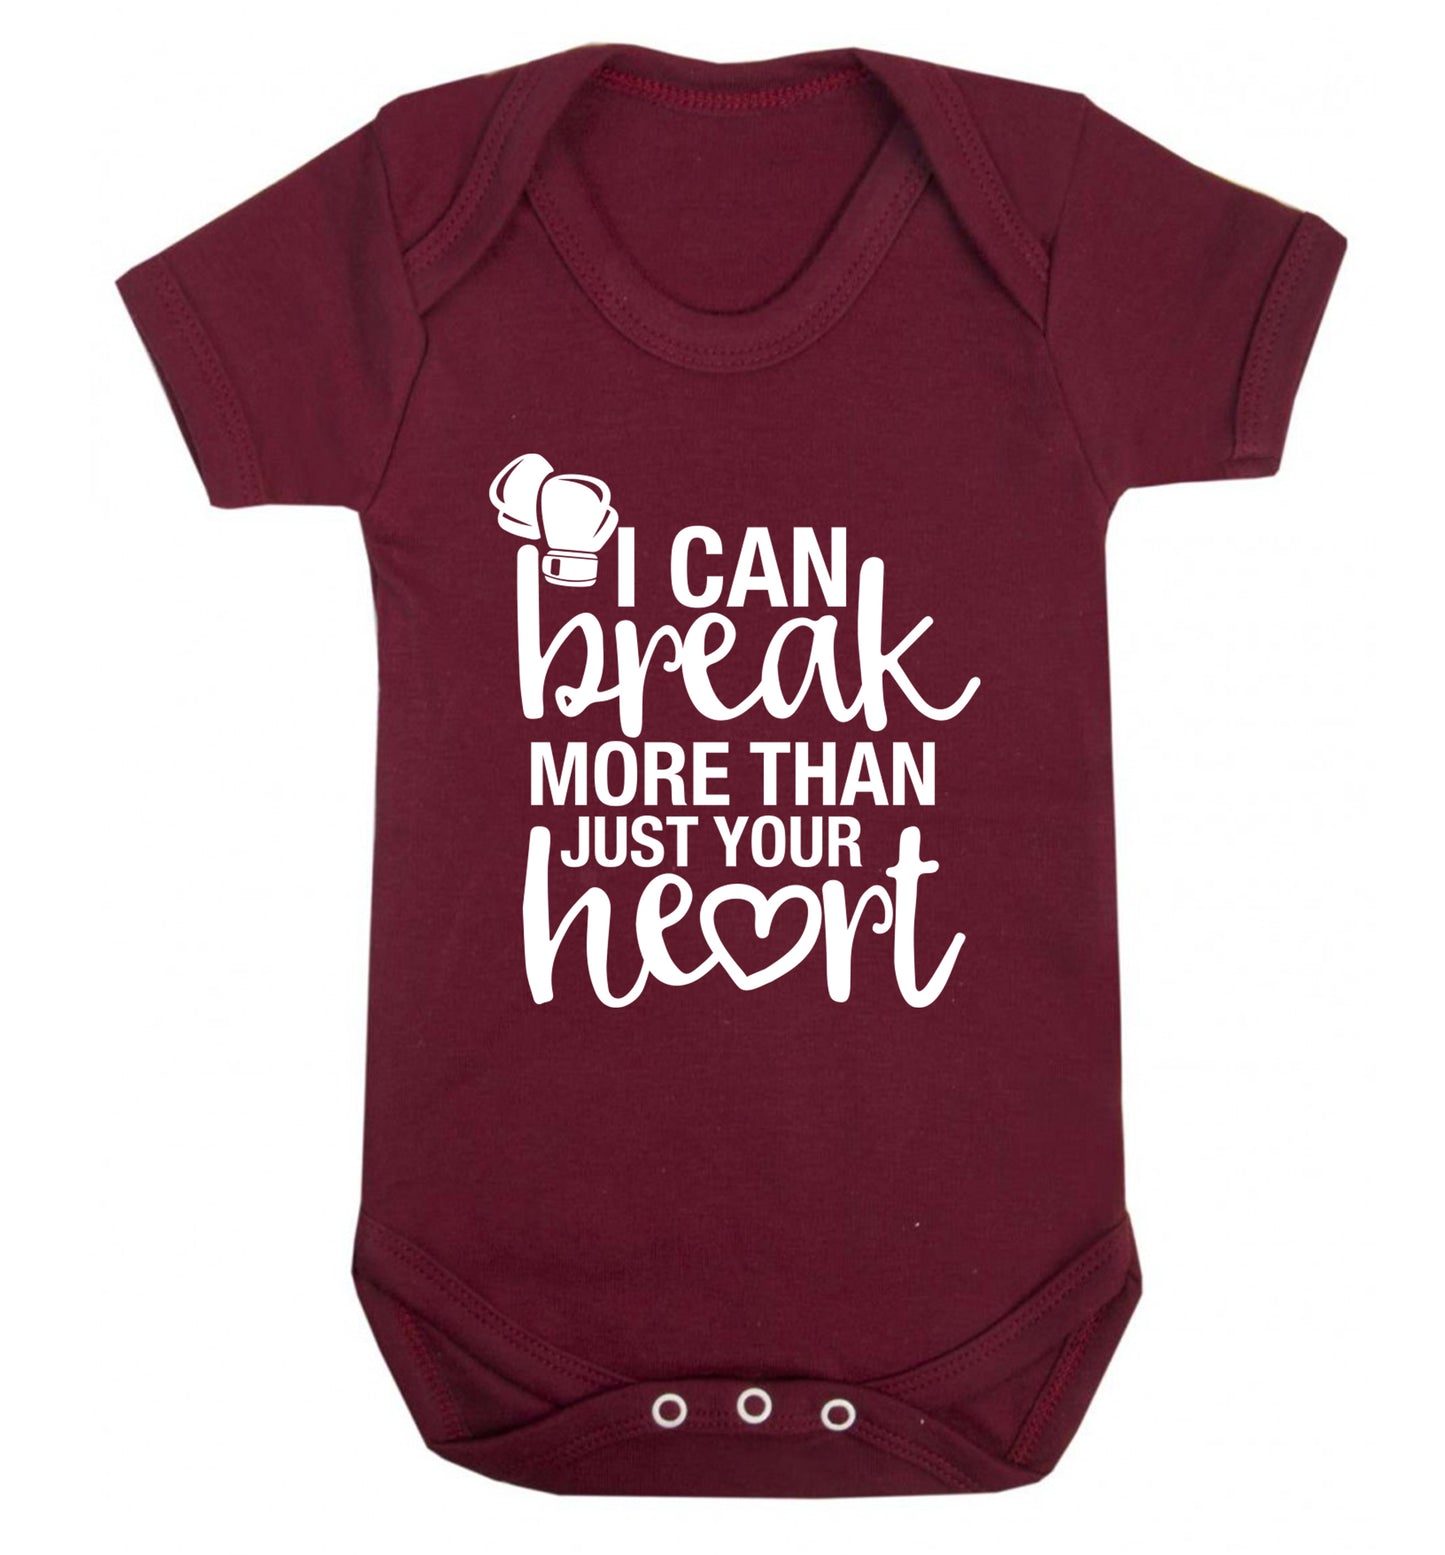 I can break more than just your heart Baby Vest maroon 18-24 months